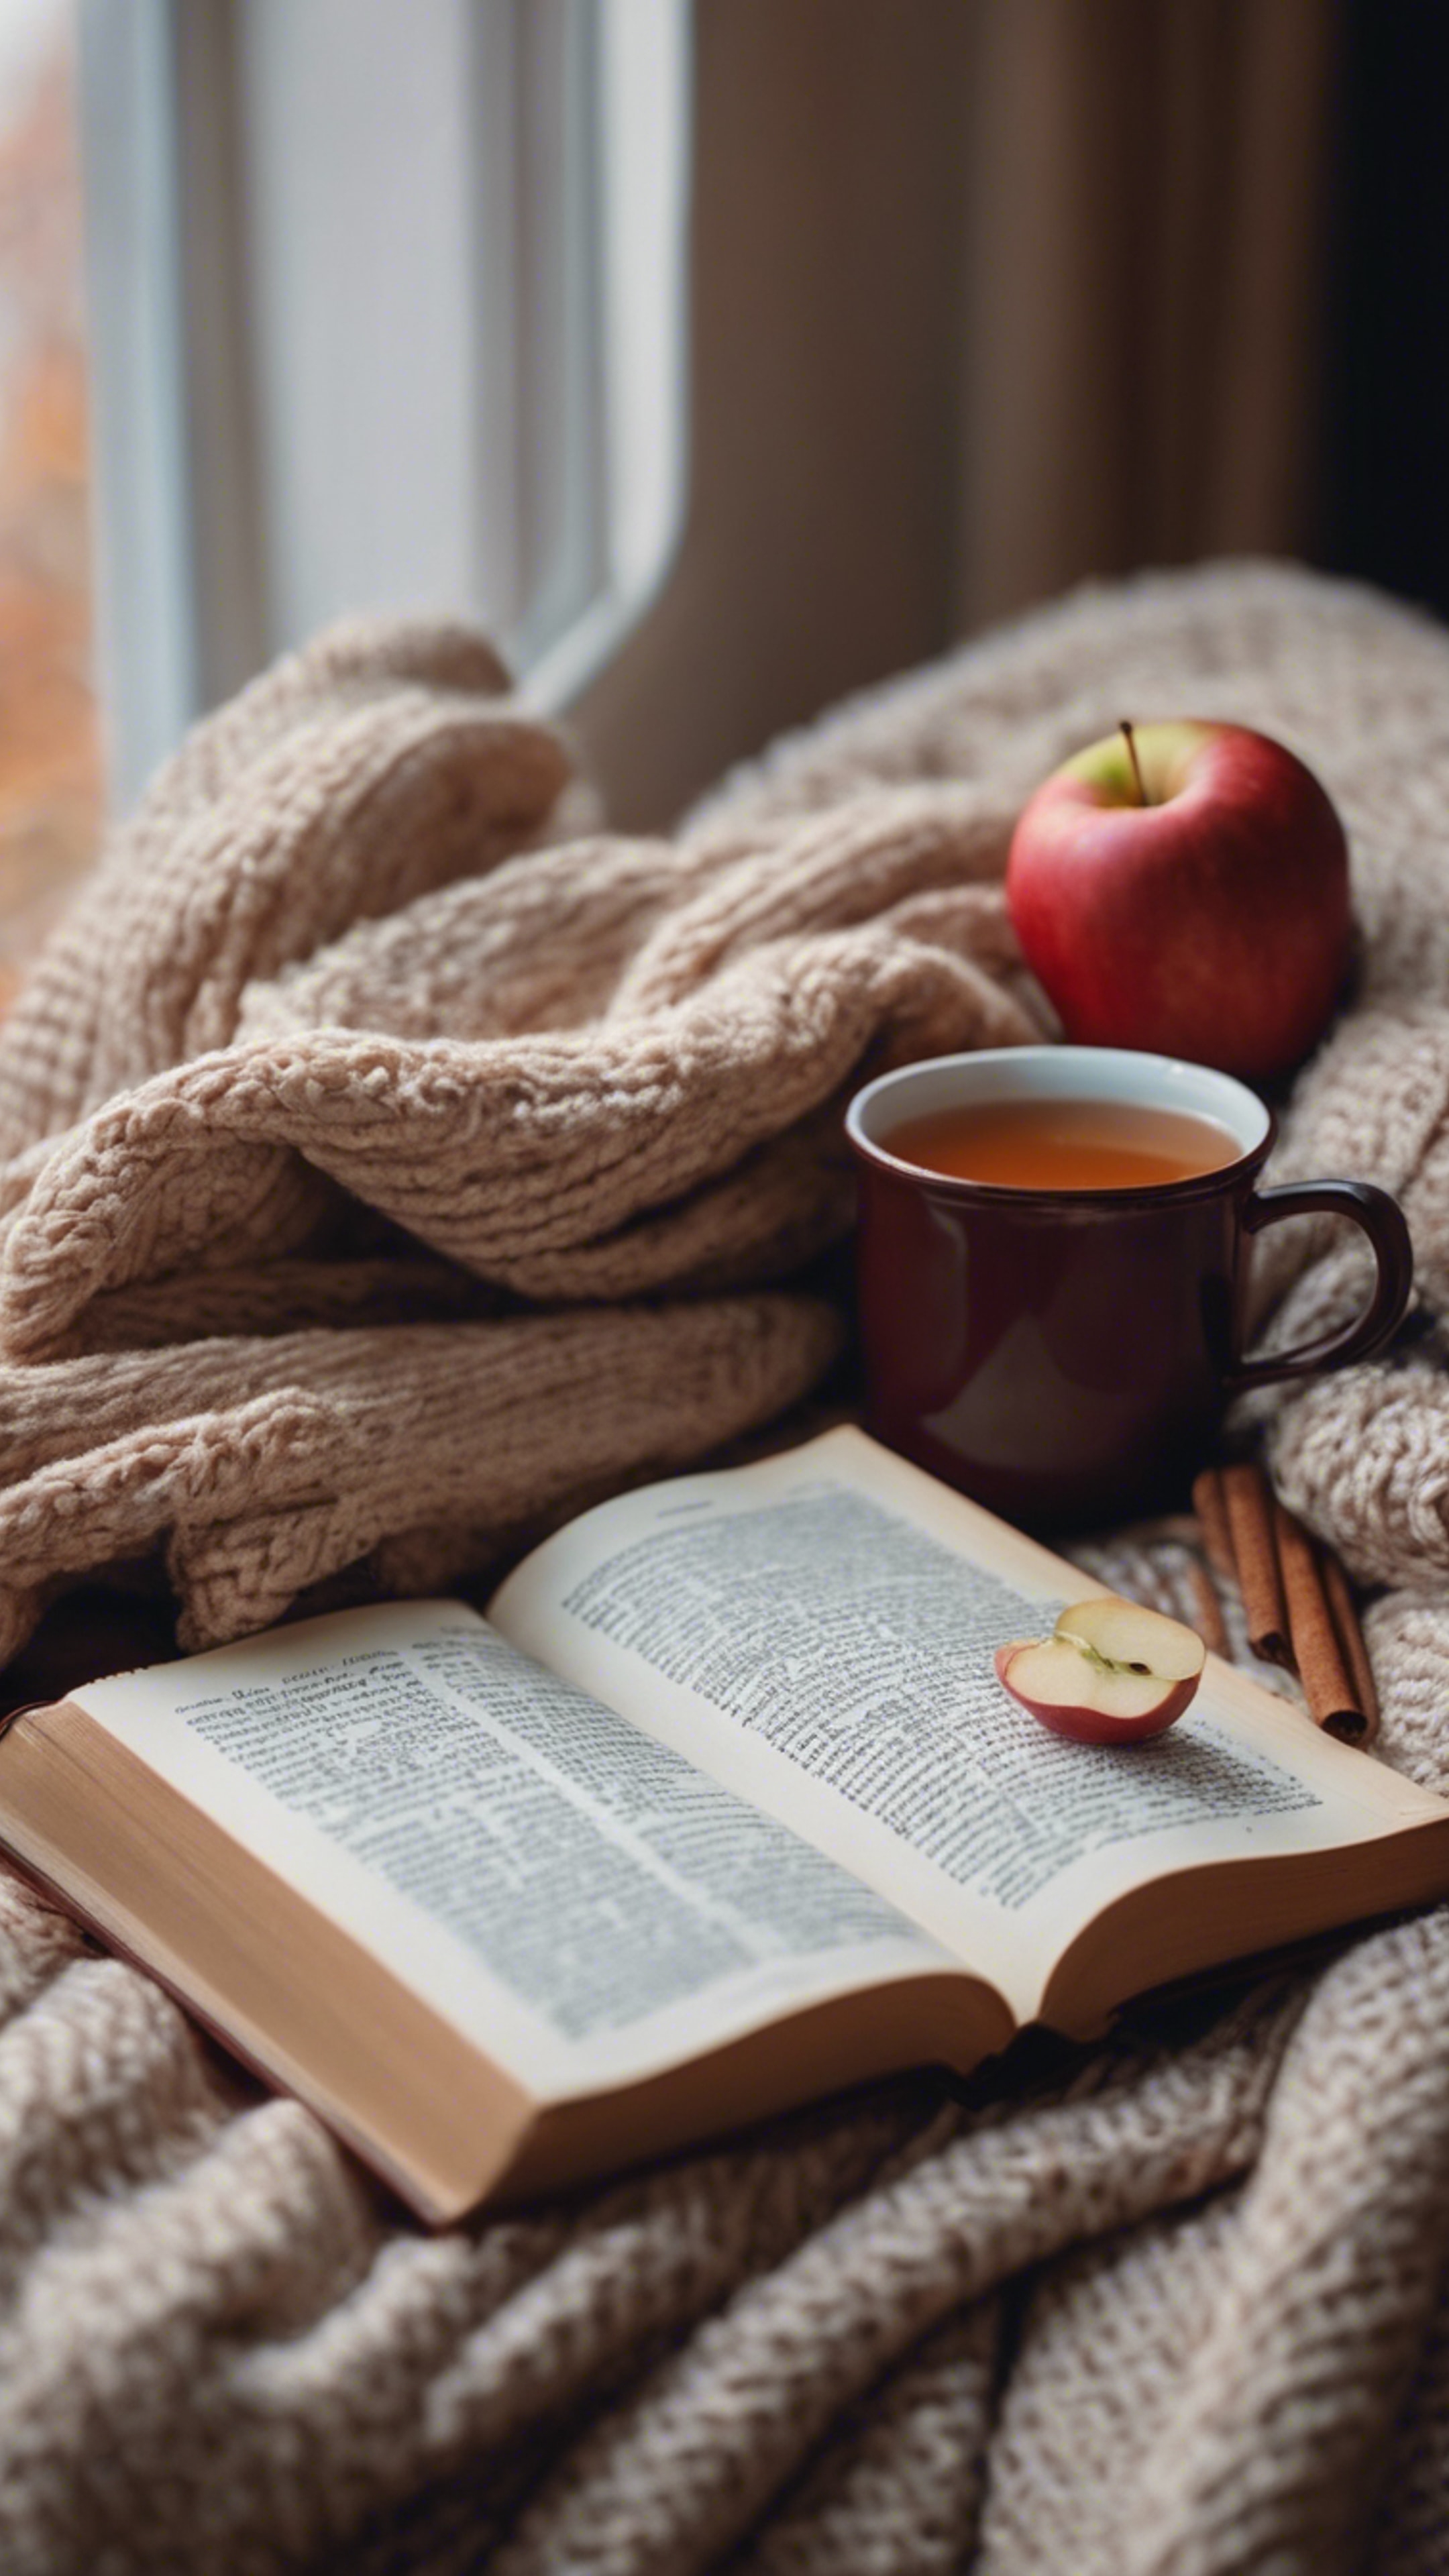 A book with a warm knit blanket and a cup of hot apple cider against the backdrop of a rainy autumn afternoon.壁紙[8a0d8609209e414cbfa7]